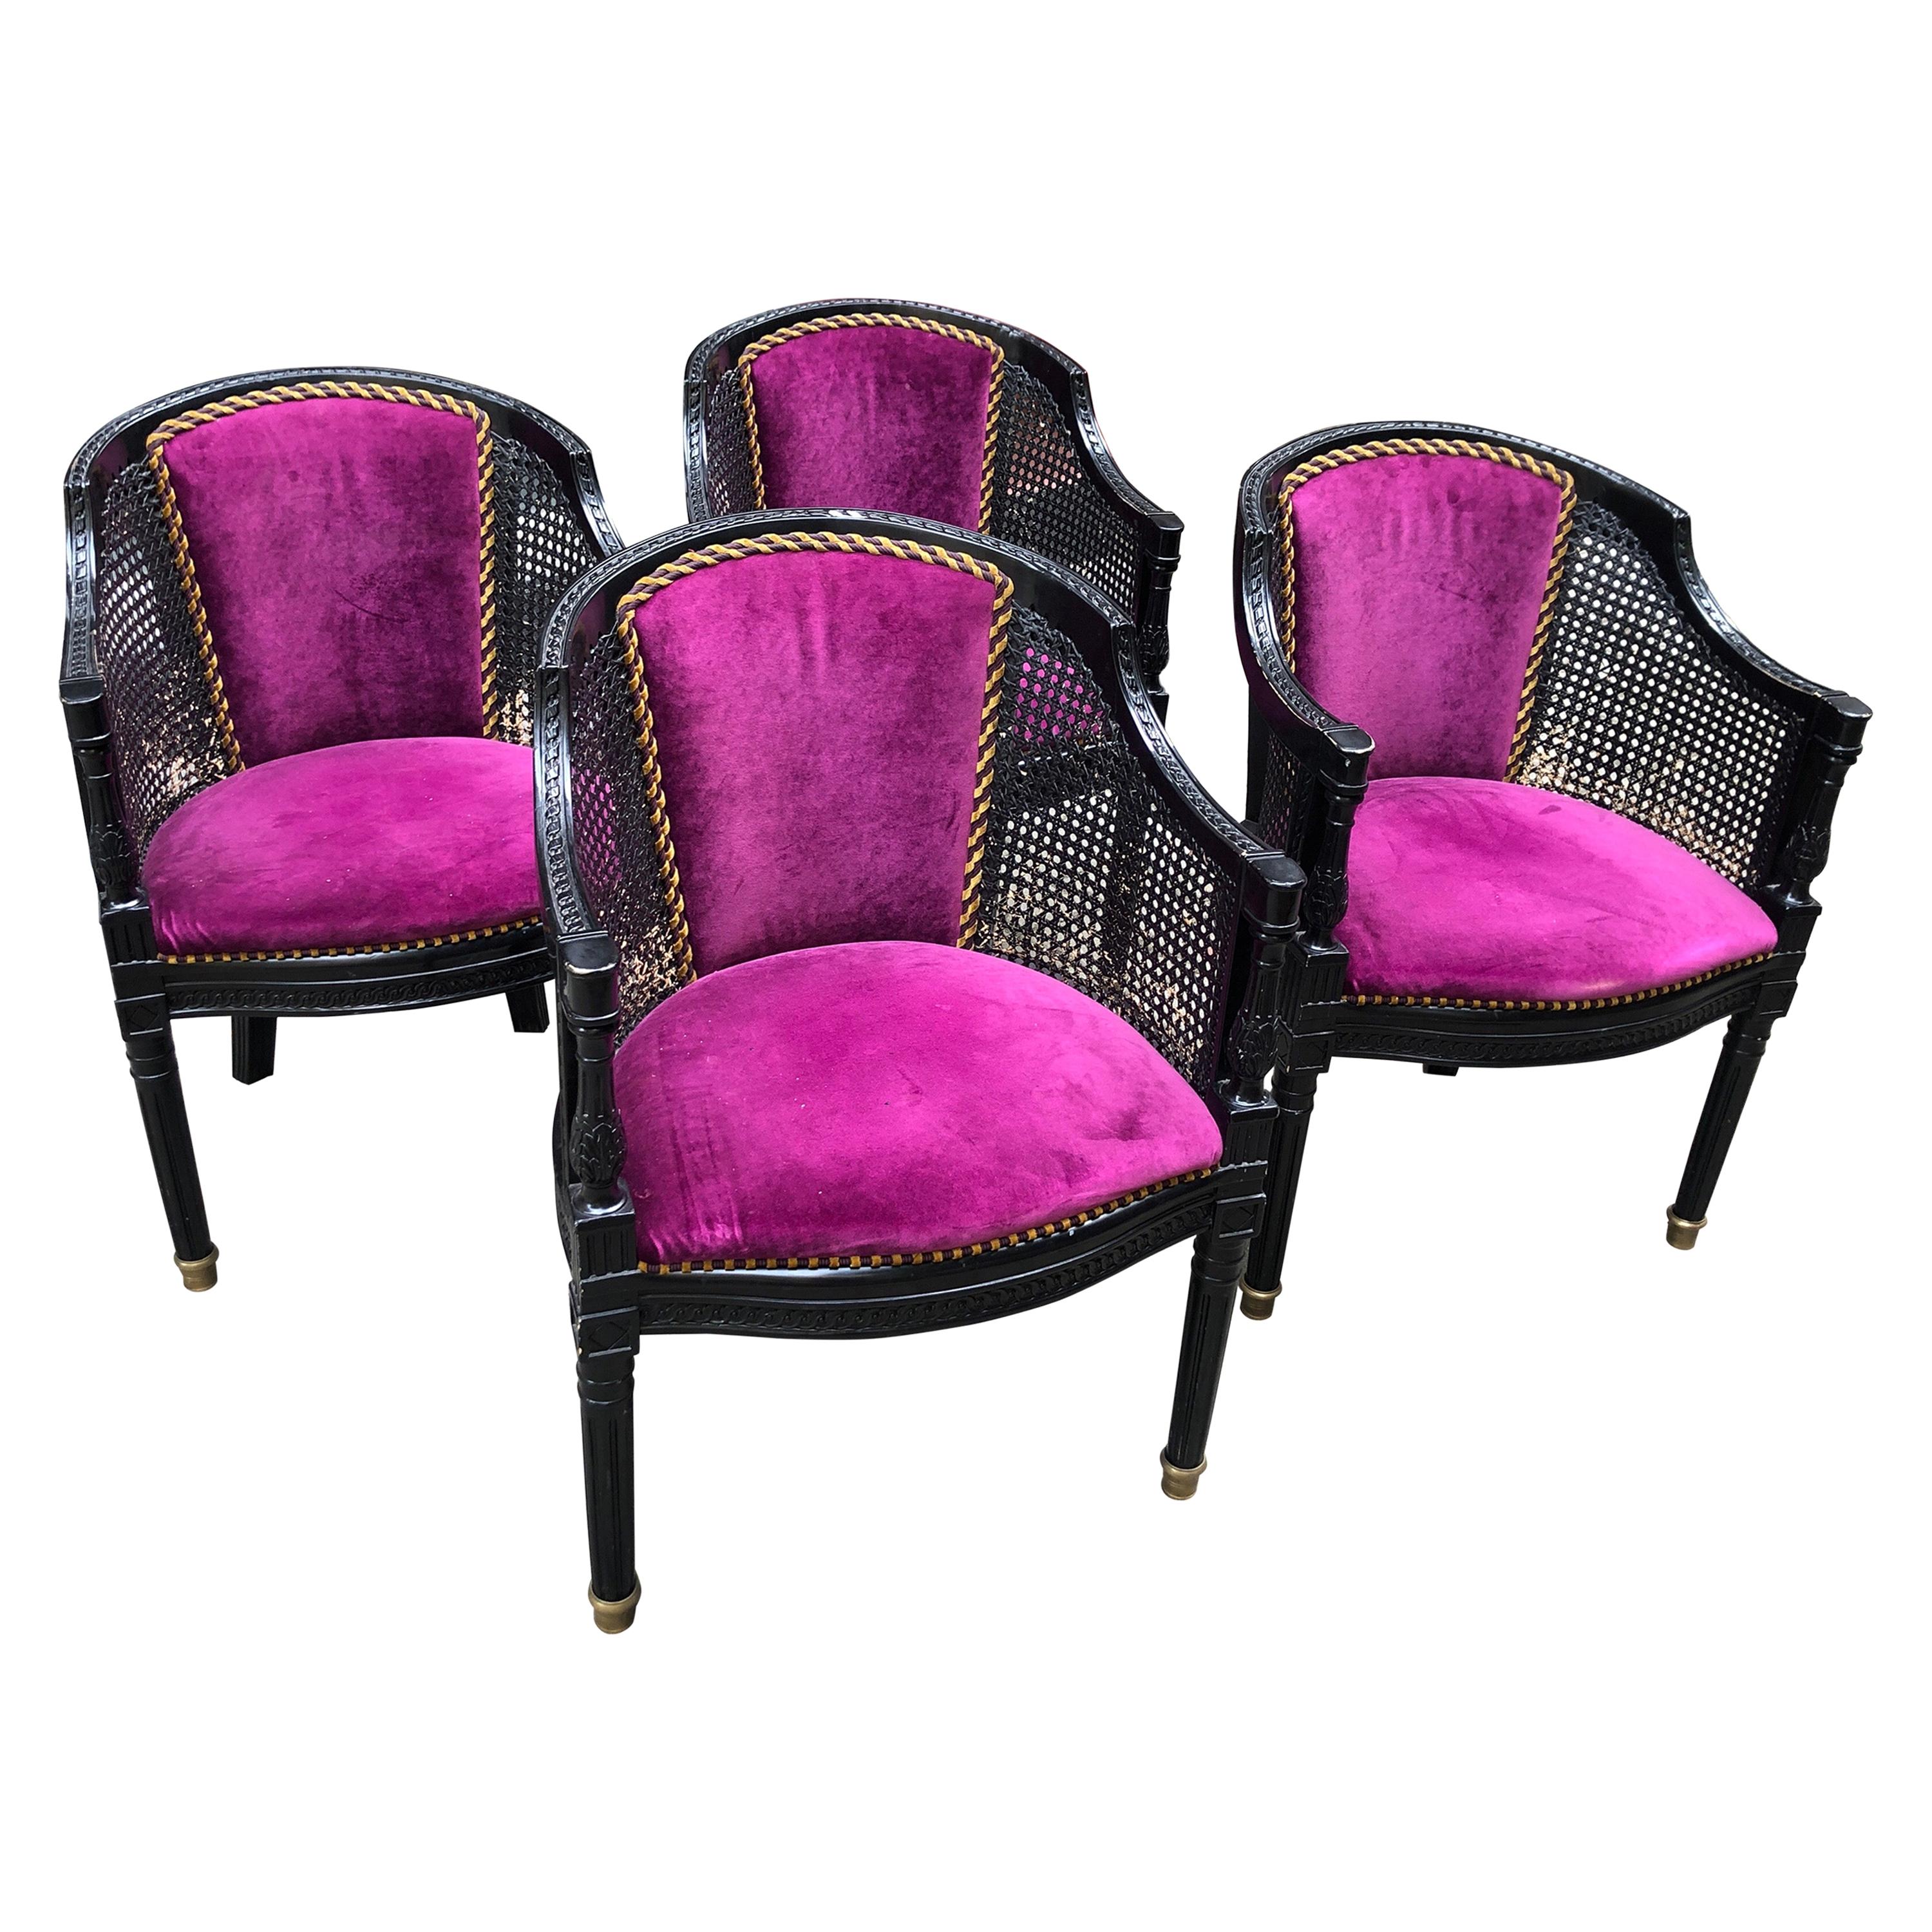 20th Century Set of Four Black Cane Armchairs in Purple Velvet and Wooden Frame For Sale